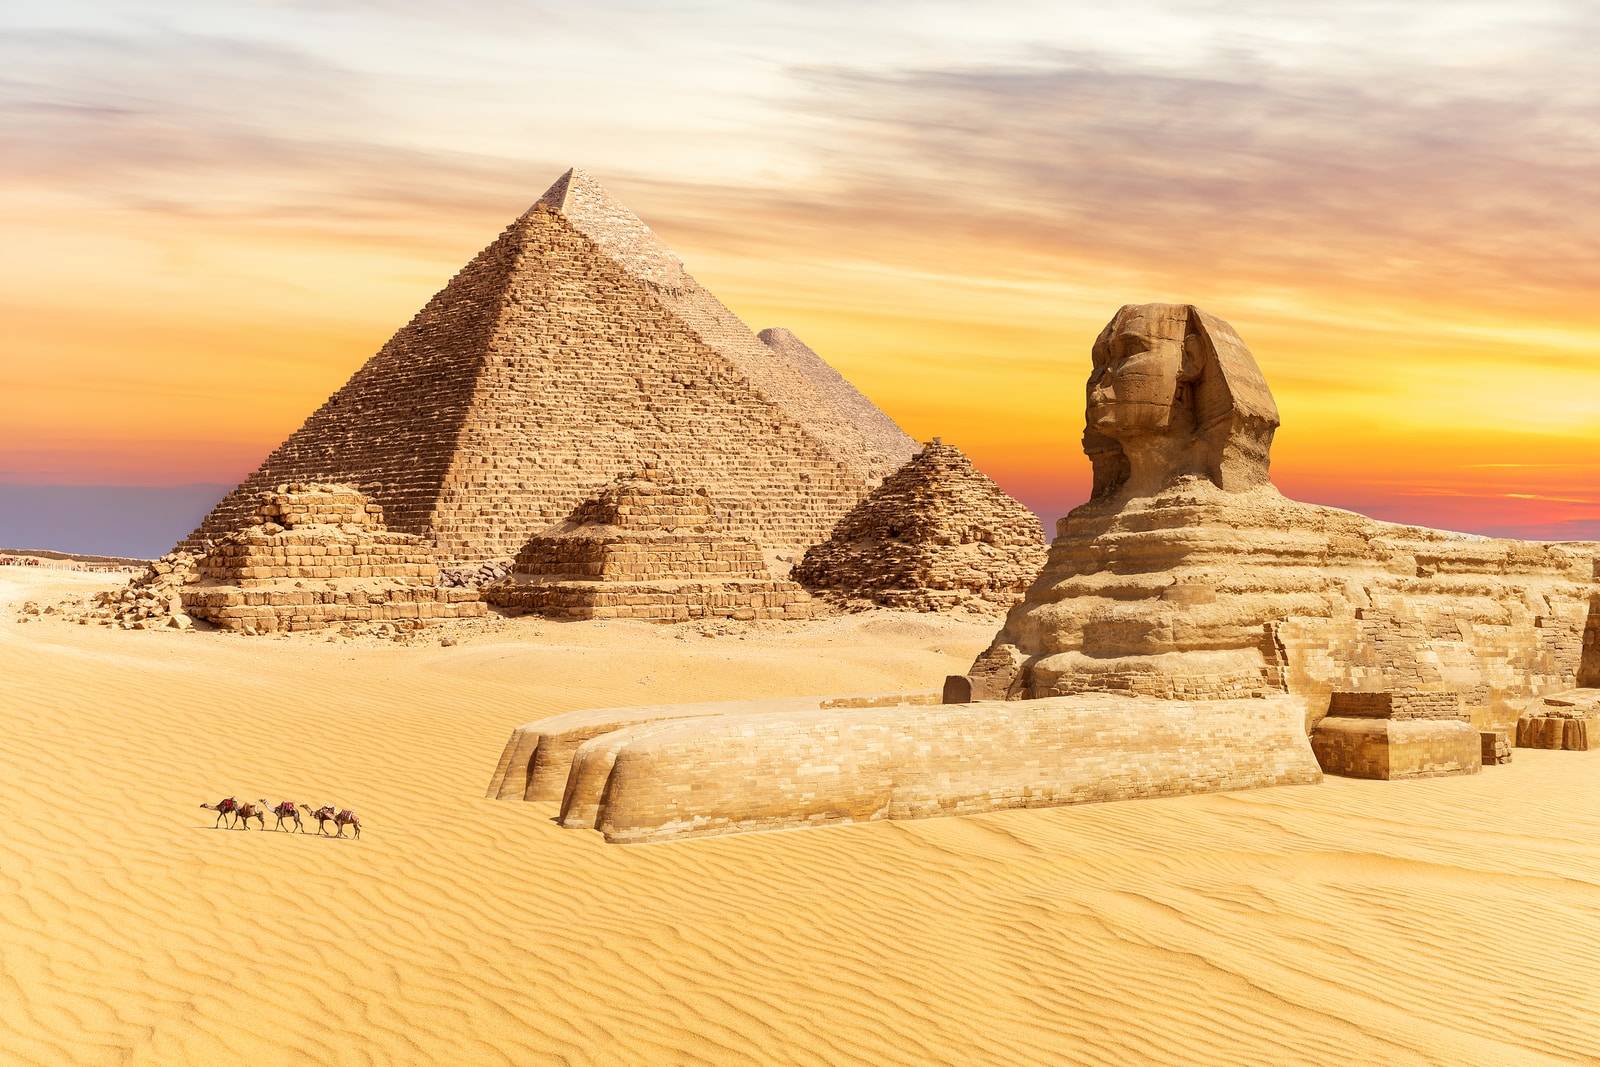 The Sphinx and the Pyramids of Giza